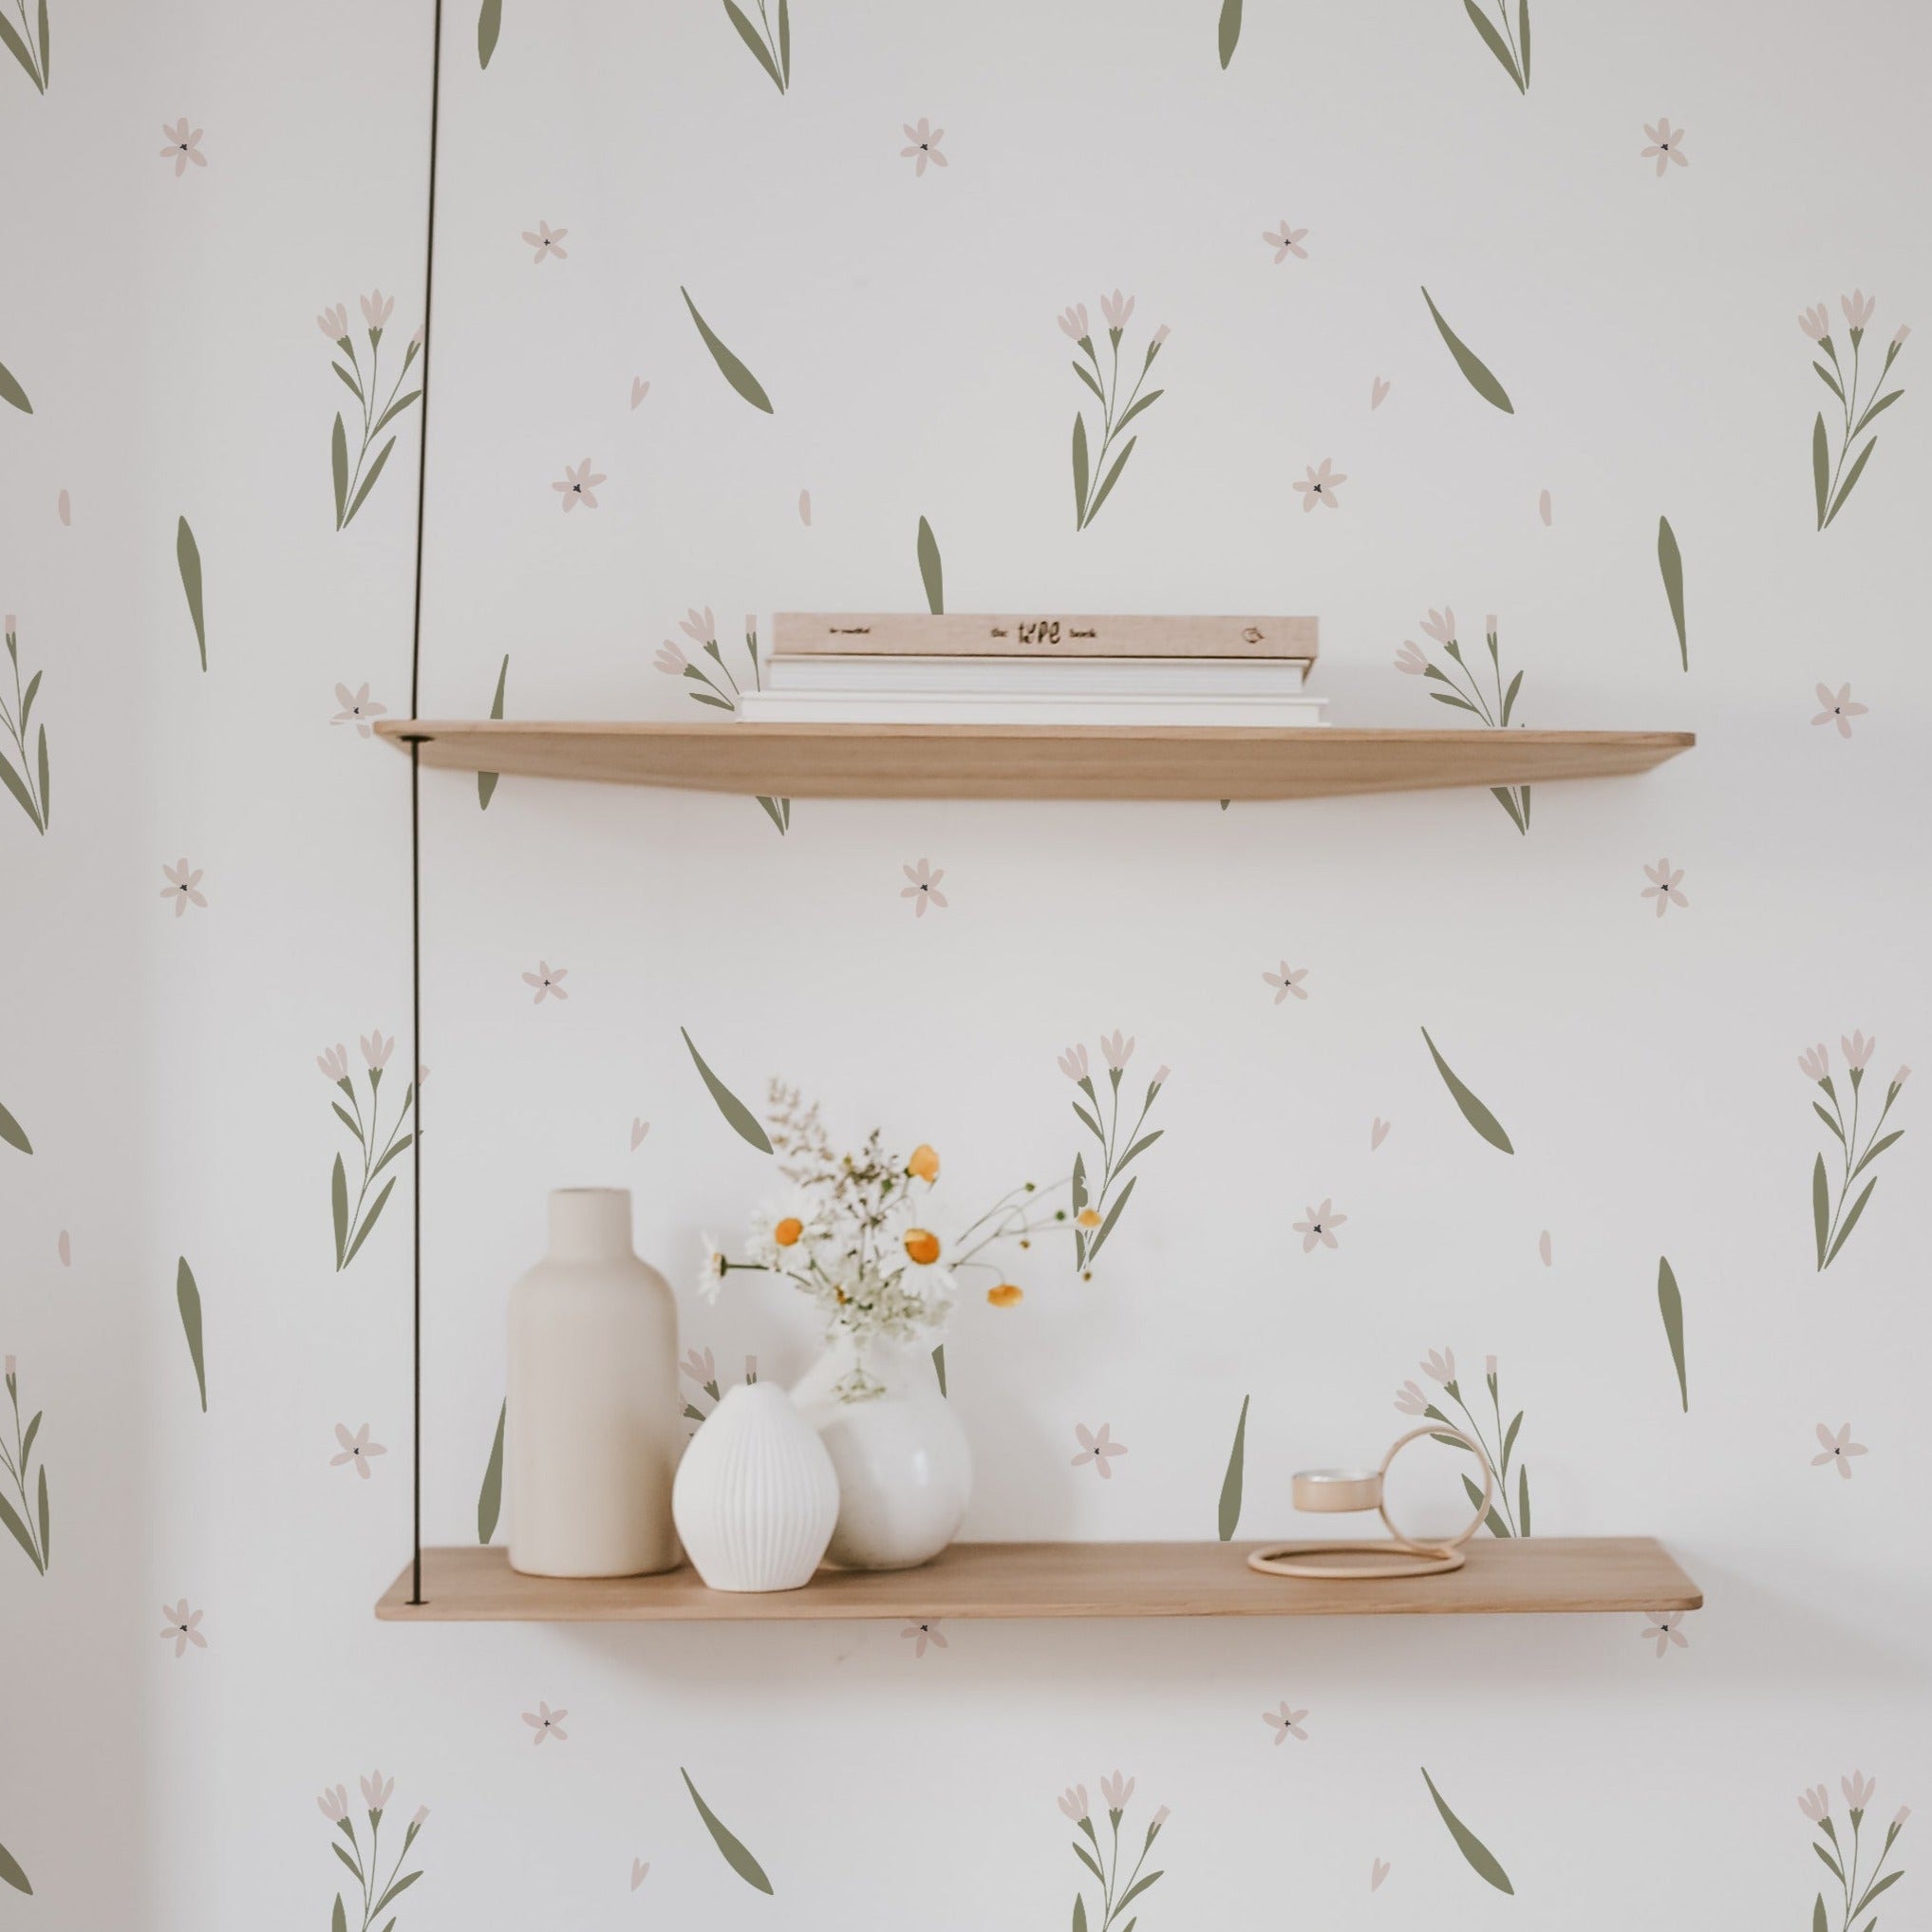 Summer Market Wallpaper in a serene living space, with subtle floral and foliage designs in pastel shades, complementing minimalist wooden shelving and modern decor, creating a fresh and inviting atmosphere.